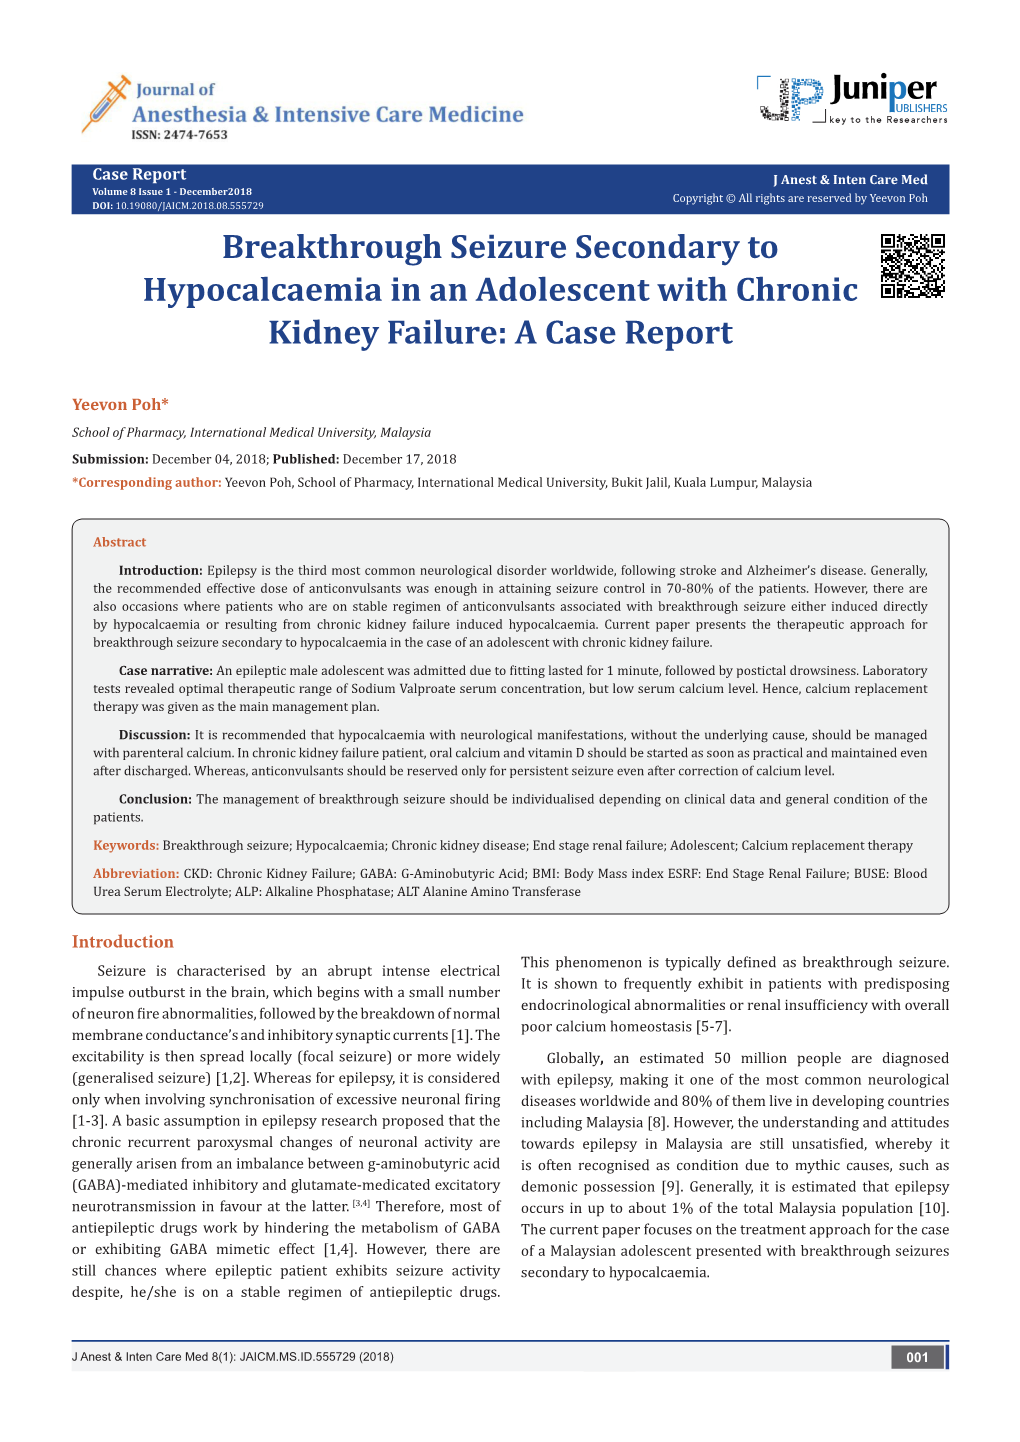 Breakthrough Seizure Secondary to Hypocalcaemia in an Adolescent with Chronic Kidney Failure: a Case Report